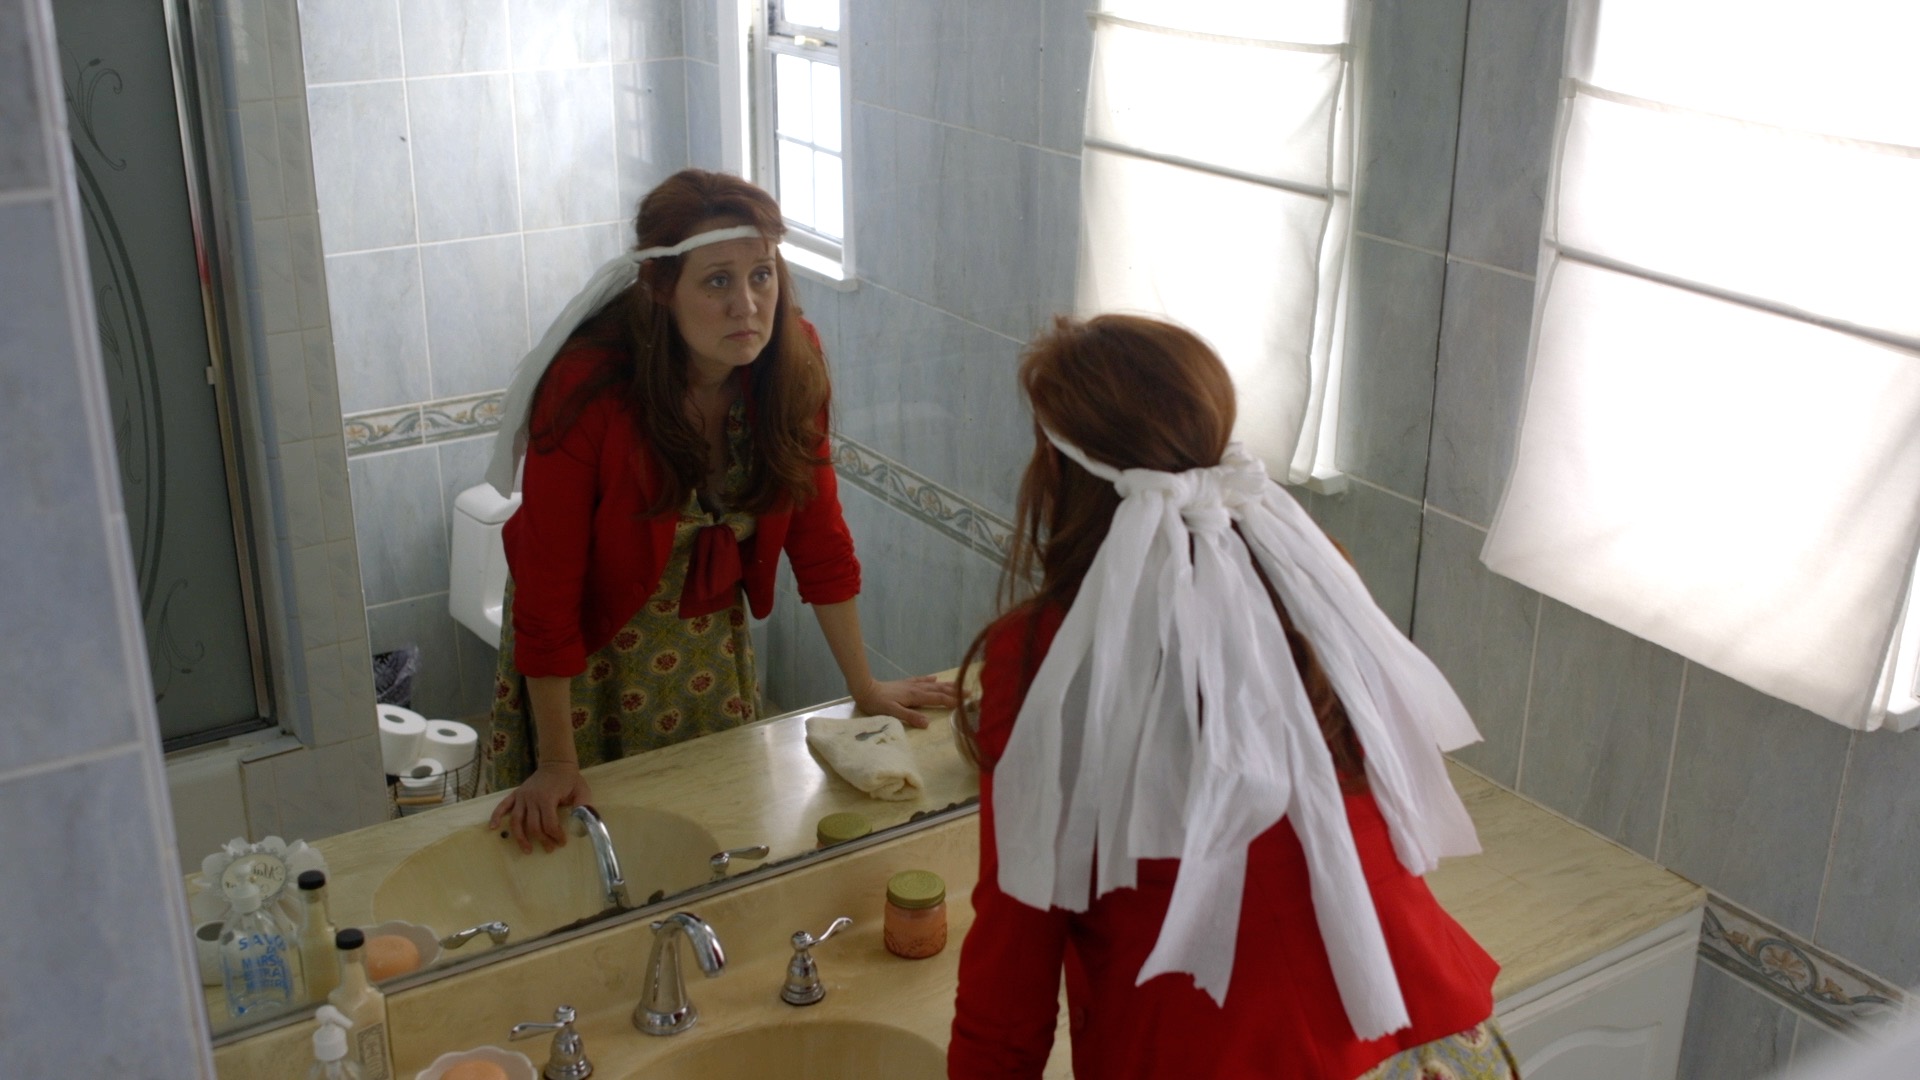 A woman in a dress wearing a tissue paper headband stares wide-eyed into a bathroom mirror.